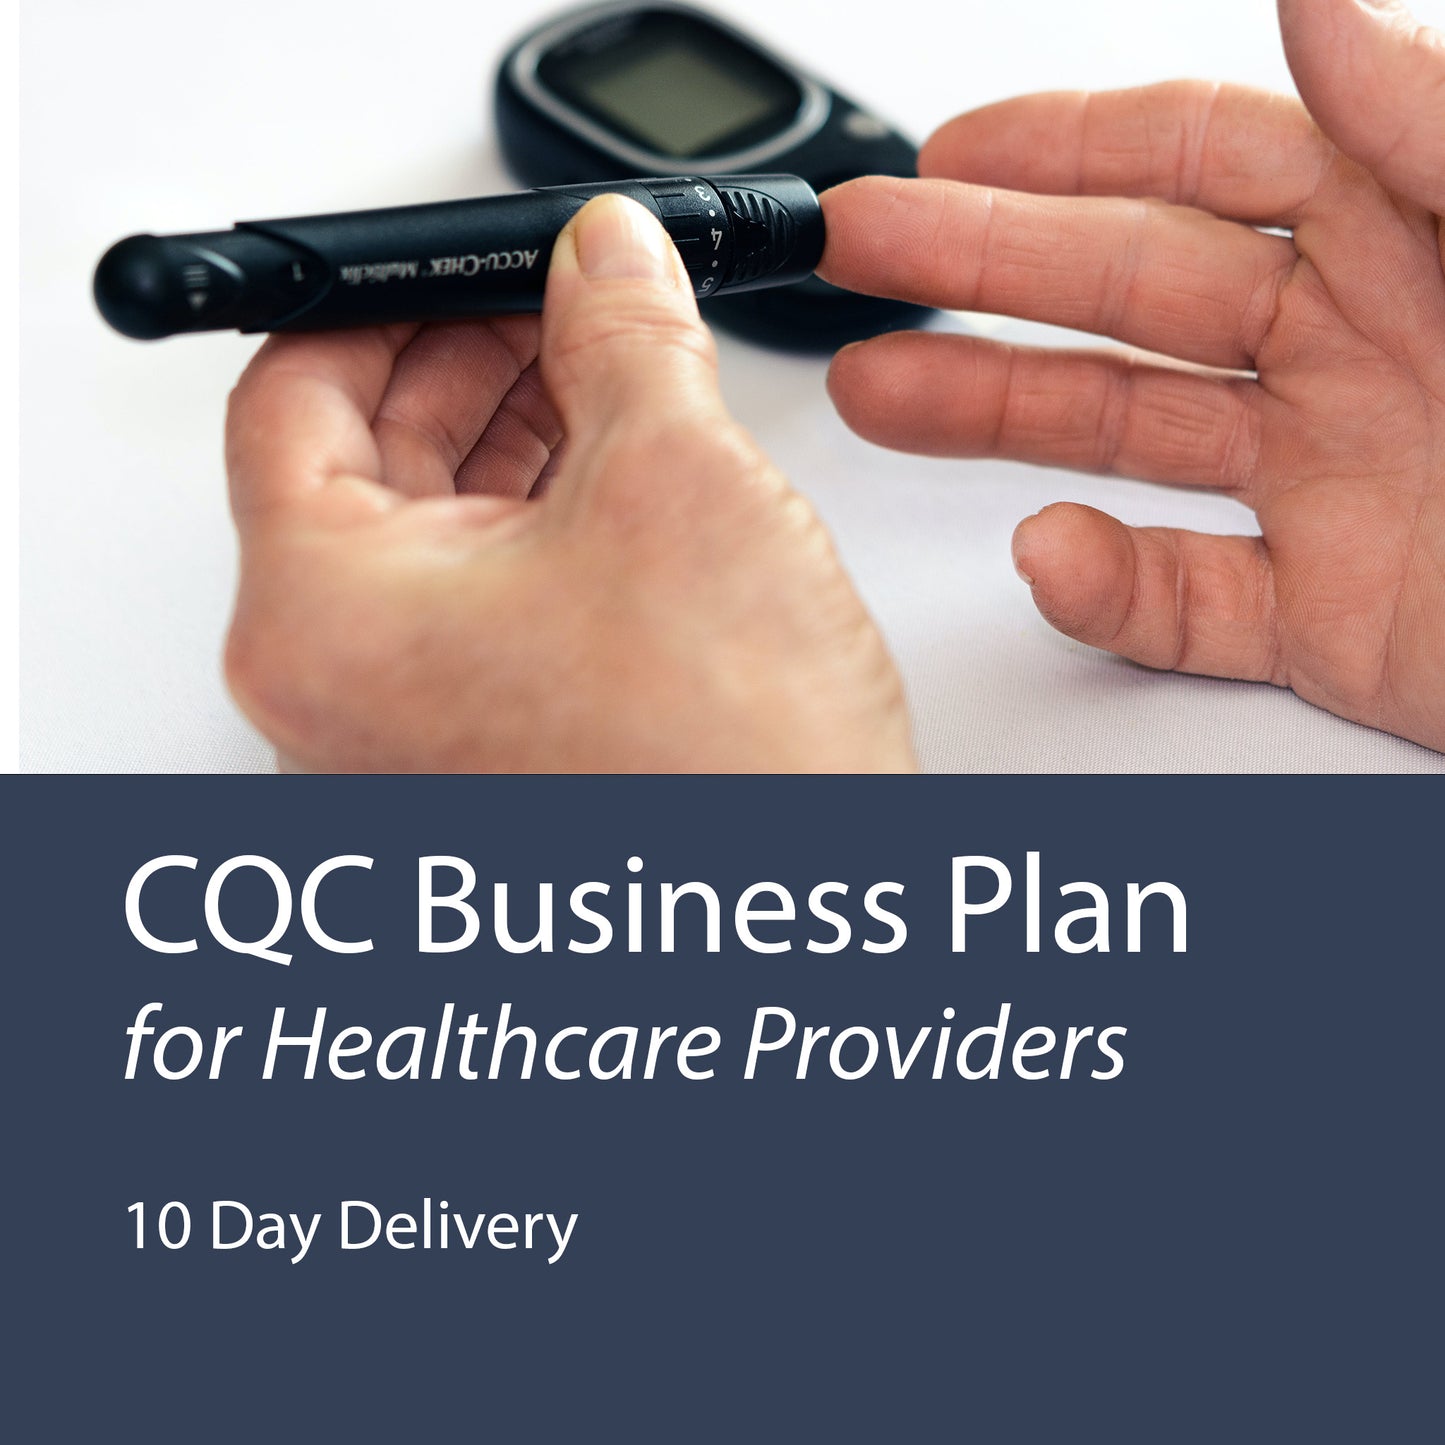 CQC Business Plan for Healthcare Providers